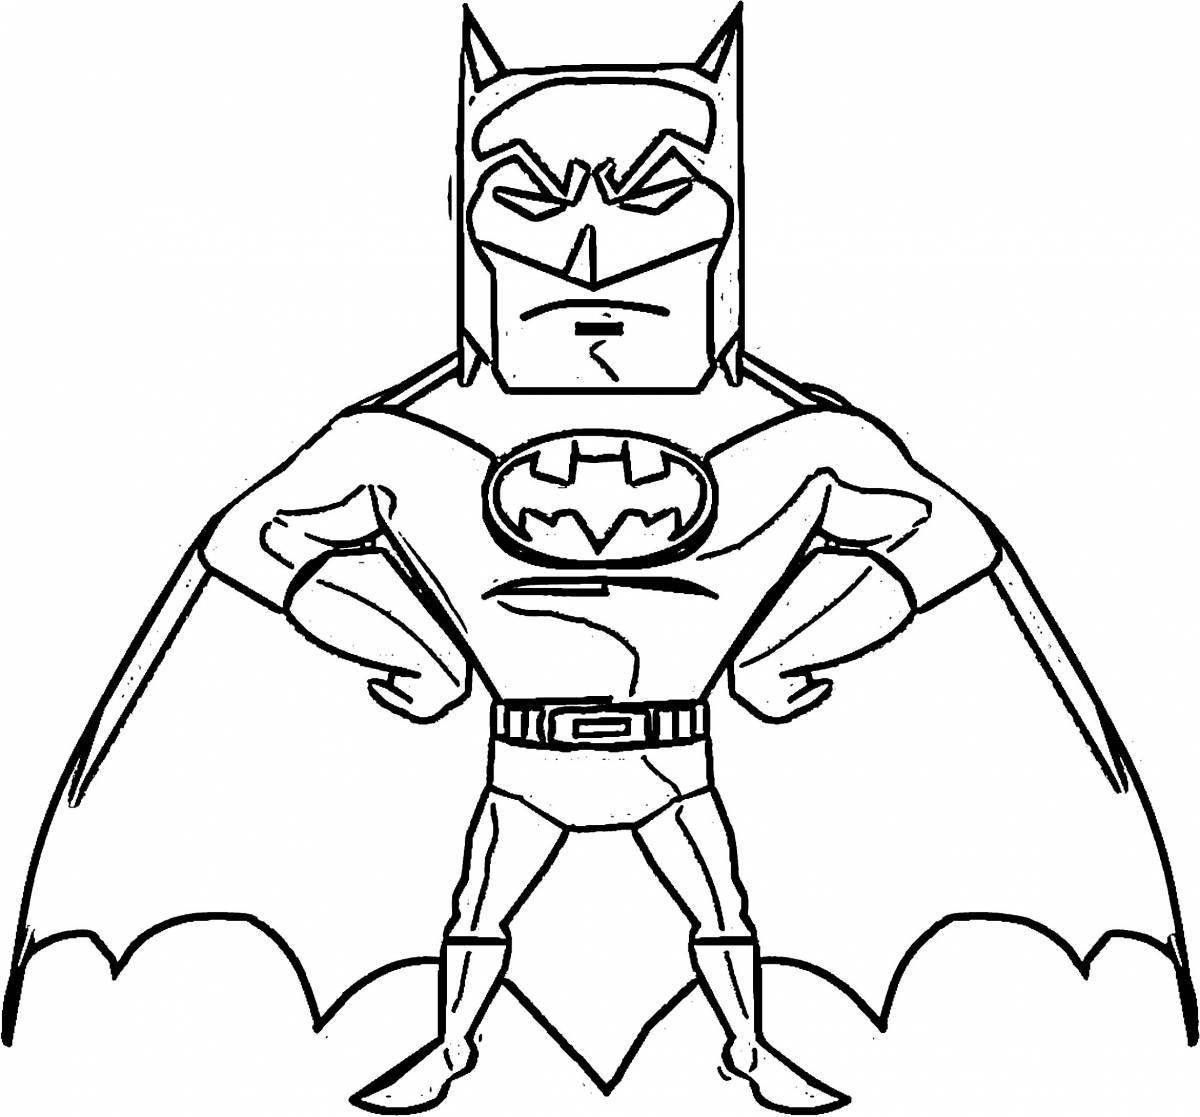 Creative batman coloring book for 3-4 year olds